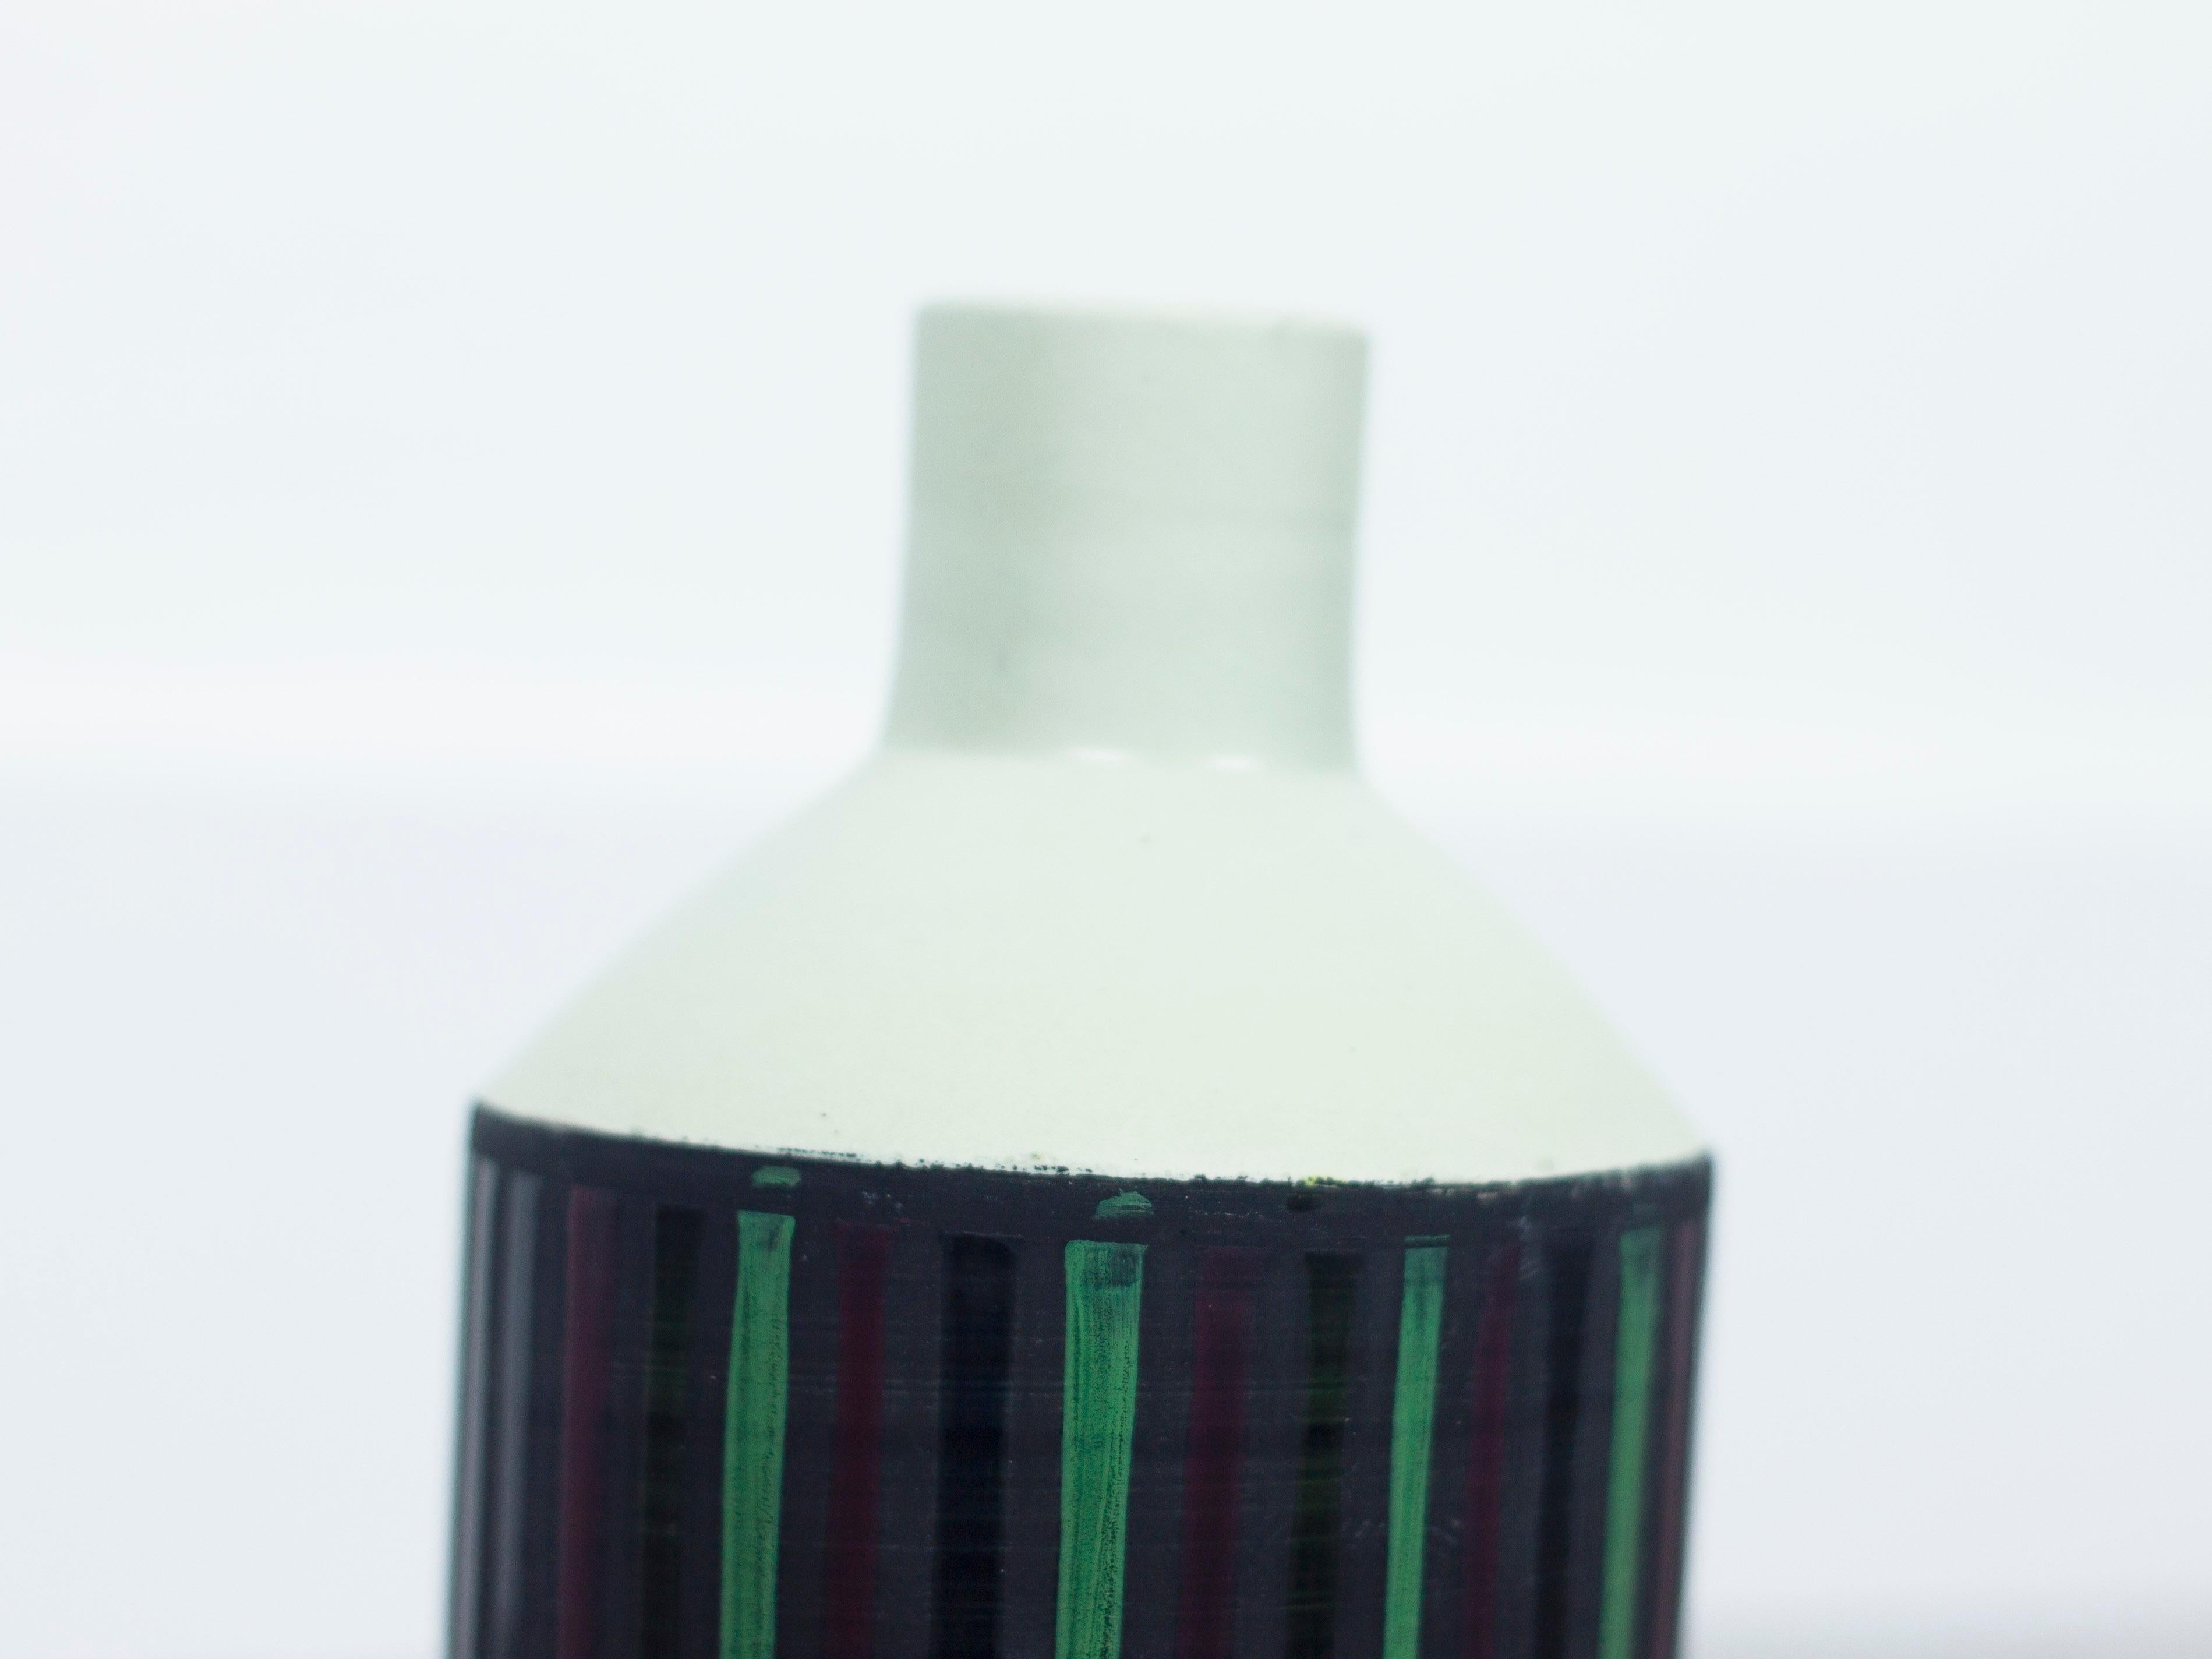 Small Ceramic Vase by Ettore Sottsass for Bitossi, 1959 In Good Condition For Sale In Fort Lauderdale, FL